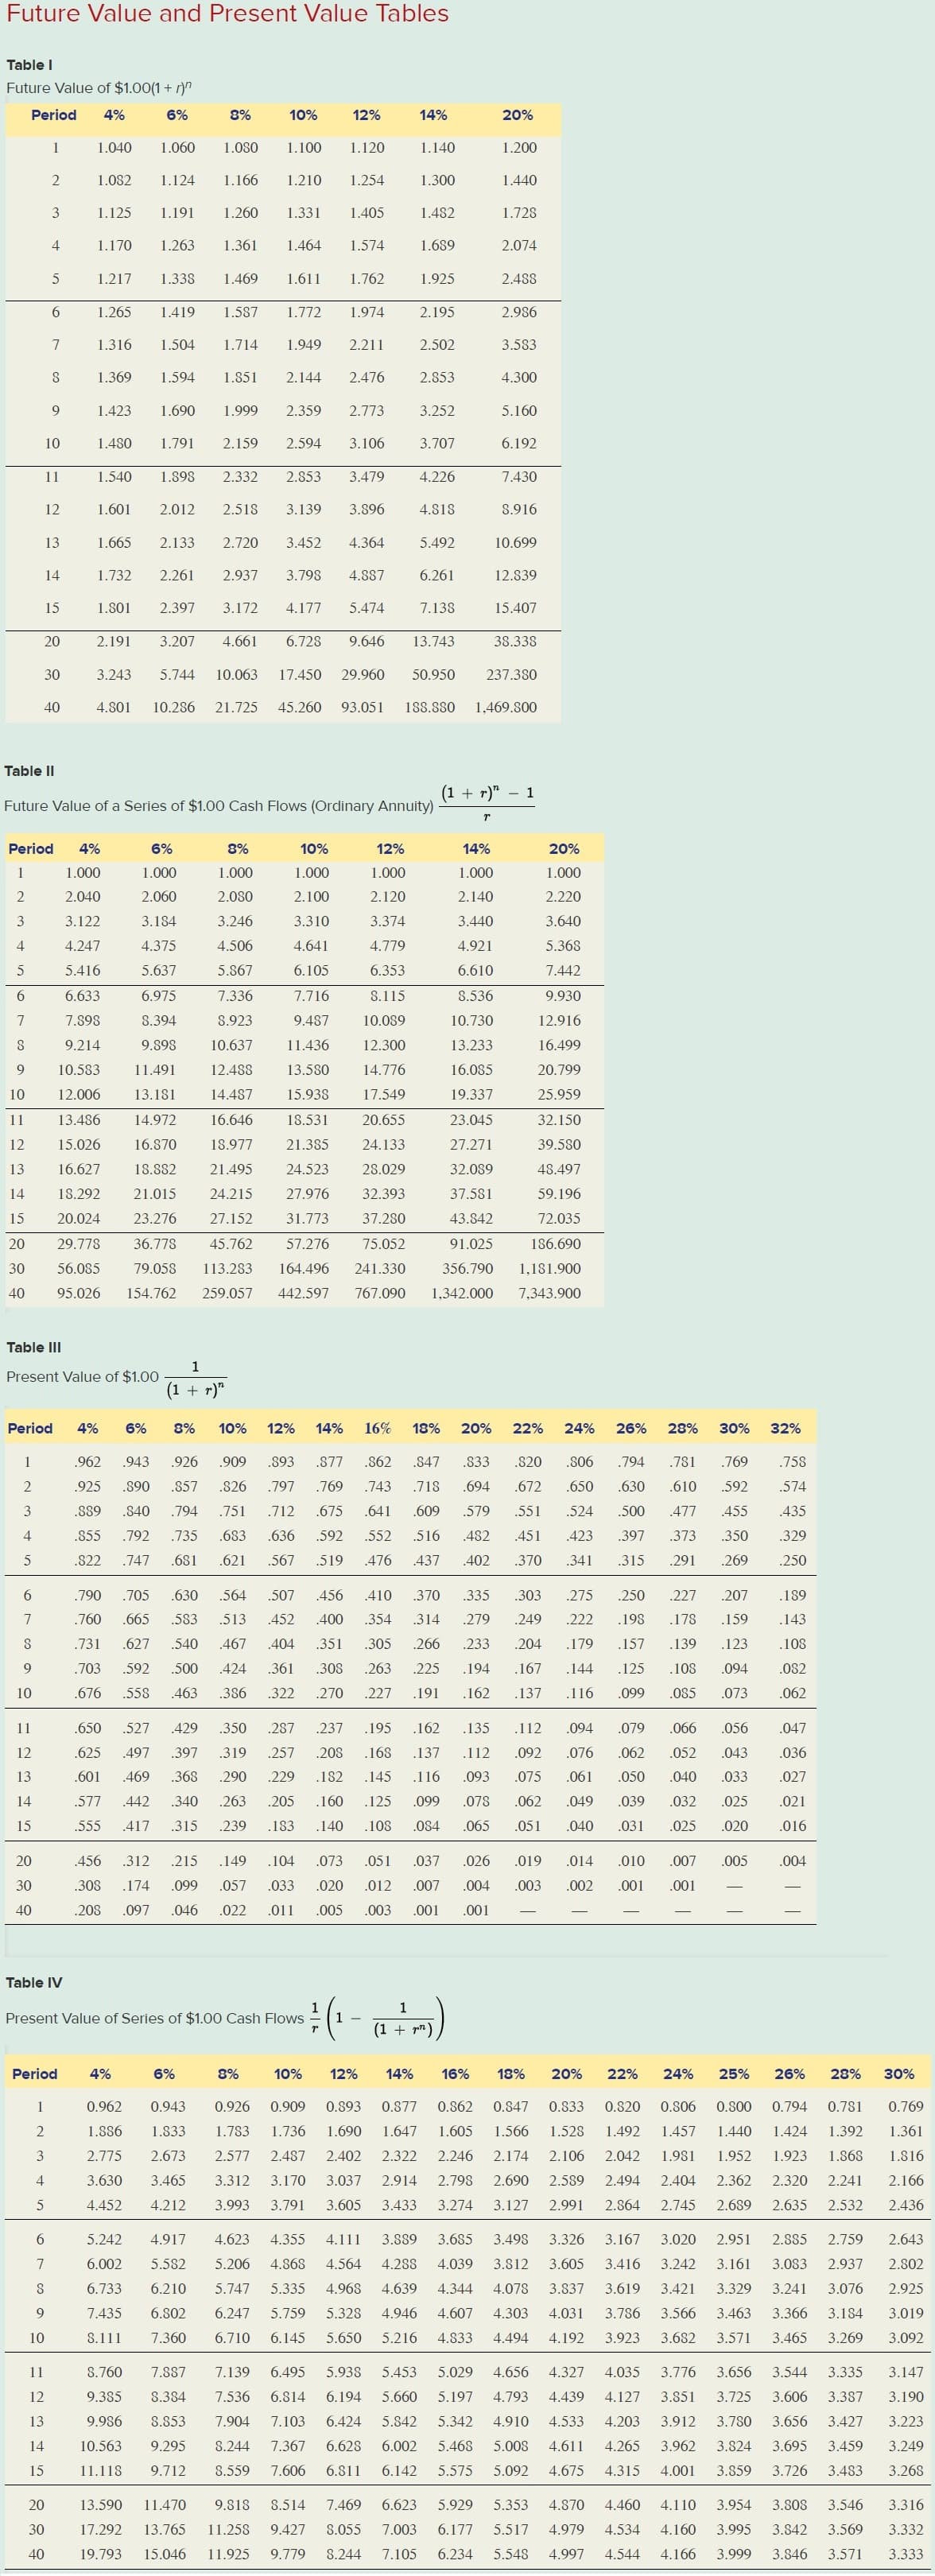 Future Value and Present Value Tables
Table I
Future Value of $1.00(1+r)^
Period 4%
1
1
2
3
+ in
4
5
6
7
8
9
10
11
12
13
14
15
2
20
30
40
3
4
5
6
7
10
8
9
12
13
11
14
15
20
30
6
7
8
9
10
40
11
12
13
14
15
20
30
40
Period 4%
1
1.000
2
2.040
3
3.122
4
4.247
5
5.416
6
6.633
7
7.898
8
9.214
9
10.583
10
12.006
11
13.486
12 15.026
16.627
13
14 18.292
15 20.024
20
30
40
1.125
Table IV
1.040 1.060 1.080
1.082 1.124
1.170
1.217
1.265
1.316
1.369
1.423
1.480
Table III
Present Value of $1.00
1.540
Period 4% 6%
6%
1.601
1.665 2.133
1.732 2.261
1.801
1.263
1.254
1.405
1.361 1.464 1.574
1.338 1.469 1.611 1.762
1.419 1.587
1.504 1.714
1.594 1.851
1.166 1.210
1.191 1.260 1.331
2.191 3.207
1.898 2.332
2.012
Period 4%
1
2
3
4
5
8%
1.690 1.999 2.359
1.791 2.159
2.594
6%
1.000
2.060
3.184
4.375
5.637
6.975
8.394
9.898
11.491
13.181
10%
12%
1.100 1.120
14.972
16.870
1.772
1.949
2.144
1
(1 + r)"
2.518 3.139
2.853
2.720 3.452
2.937
2.397 3.172 4.177 5.474
3.798
6%
1.974
8%
10%
12%
1.000
1.000
1.000
2.080
2.100
2.120
3.246
3.310
3.374
4.506
4.641
4.779
5.867
6.105
6.353
7.336
7.716
8.115
8.923
9.487
10.089
10.637
11.436
12.300
12.488
13.580 14.776
14.487
15.938
17.549
16.646
18.531
20.655
18.977
21.385 24.133
18.882
21.495
24.523 28.029
24.215 27.976
32.393
21.015
23.276 27.152 31.773
37.280
36.778 45.762 57.276 75.052
29.778
56.085 79.058 113.283 164.496 241.330
95.026 154.762 259.057 442.597
2.211
2.476
Table II
Future Value of a Series of $1.00 Cash Flows (Ordinary Annuity)
8%
2.773
3.106
3.479
1
Present Value of Series of $1.00 Cash Flows
pº
3.896
.456 .312
.308 .174
.215 .149 .104
.099 .057 .033
.208 .097 .046 .022 .011
4.364
4.887
14%
1.140
1.300
1.482
1.689
1.925
2.195
2.502
2.853
4.661 6.728 9.646 13.743
3.252
3.707
4.226
4.818
5.492
6.261
7.138
3.243 5.744 10.063
4.801 10.286 21.725 45.260 93.051 188.880 1,469.800
.962 .943 .926 .909 .893 .877 .862 .847 .833
.925 .890 .857 .826 .797 .769 .743 .718 .694
.840 .794 .751 .712 .675 .641 .609 .579
.792 .735 .683 .636 .592 .552 .516 .482
.681 .621 .567 .519 .476 .437 .402
.889
.855
.822
.747
.650
.527 .429 .350 .287 .237 .195 .162 .135
.625 .497 .397 .319 .257 .208 .168
.137 .112
.601 .469 .368 .290 .229 .182 .145 .116 .093
.577 .442 .340 .263 .205 .160 .125 .099 .078
555 .417 315 .239 .183 .140 .108 .084 .065
20%
1.200
T
1.440
1.728
2.074
2.488
2.986
1
(1 + r)
3.583
4.300
17.450 29.960 50.950 237.380
5.160
6.192
7.430
8.916
10.699
12.839
8% 10% 12% 14% 16% 18% 20% 22% 24% 26%
15.407
38.338
(1 + r)" - 1
14%
20%
1.000
1.000
2.140
2.220
3.440
3.640
4.921
5.368
6.610
7.442
8.536
9.930
10.730
12.916
13.233
16.499
16.085
20.799
19.337
25.959
23.045
32.150
27.271
39.580
32.089
48.497
37.581
59.196
43.842
72.035
91.025
186.690
356.790 1,181.900
767.090 1.342.000 7.343.900
.085 .073 .062
.790 .705 .630 .564 .507 .456 .410 .370 .335 .303 .275 .250 .227 .207 .189
.760 .665 .583 .513 .452 .400 .354 .314 .279 .249 .222 .198 .178 .159 .143
.731 .627 540 .467 .404 .351 .305 .266 .233 .204 .179 .157 .139 .123 .108
.703 .592 .500 .424 .361 .308 .263 .225 .194 .167 .144 .125 .108 .094 .082
.676 .558 .463 .386 .322 .270 .227 .191 .162 .137 .116 .099
.112 .094 .079
.066 .056 .047
.092 .076 .062 .052 .043 .036
.075 .061 .050 .040 .033 .027
.049 .039 .032 .025 .021
.040 .031 .025 .020 .016
.062
.051
.073 .051 .037 .026 .019 .014 .010
.020 .012 .007 .004 .003 .002 .001
.005 .003 .001 .001
0.962 0.943 0.926
1.886 1.833
10% 12% 14%
16%
0.909 0.893 0.877 0.862 0.847
1.783
1.736 1.690 1.647 1.605 1.566
2.775 2.673 2.577 2.487 2.402 2.322 2.246 2.174
3.630 3.465 3.312 3.170 3.037 2.914 2.798 2.690
4.452 4.212 3.993 3.791 3.605 3.433 3.274 3.127
.820 .806 .794
.672 .650 .630
551 .524 .500 .477 455
.451 .423 .397 .373 .350
.370 .341 .315 .291 .269
28% 30% 32%
.781 .769 .758
.610 .592 .574
435
.329
.250
5.242 4.917
6.002 5.582 5.206
6.733 6.210 5.747 5.335 4.968 4.639 4.344 4.078
5.328 4.946 4.607 4.303
5.650 5.216 4.833 4.494
7.435 6.802 6.247 5.759
8.111 7.360 6.710 6.145
18% 20% 22% 24%
.007 .005
.001
25% 26% 28%
0.833 0.820 0.806 0.800 0.794 0.781 0.769
1.528 1.492 1.457 1.440 1.424 1.392 1.361
2.106 2.042 1.981 1.952 1.923 1.868
1.816
2.589 2.494 2.404 2.362 2.320 2.241 2.166
2.991 2.864 2.745 2.689 2.635 2.532 2.436
13.590 11.470 9.818 8.514 7.469 6.623 5.929 5.353 4.870 4.460
17.292 13.765 11.258 9.427 8.055 7.003 6.177 5.517 4.979 4.534
19.793 15.046 11.925 9.779 8.244 7.105 6.234 5.548 4.997 4.544
.004
4.623 4.355 4.111 3.889 3.685 3.498 3.326 3.167 3.020 2.951 2.885 2.759
2.643
4.868 4.564 4.288 4.039 3.812
3.605 3.416 3.242 3.161 3.083 2.937 2.802
3.837 3.619 3.421 3.329 3.241 3.076 2.925
4.031 3.786 3.566 3.463 3.366 3.184 3.019
4.192 3.923 3.682 3.571 3.465 3.269 3.092
30%
8.760 7.887 7.139 6.495
9.385 8.384 7.536 6.814 6.194 5.660
5.197 4.793
5.938 5.453 5.029 4.656 4.327 4.035 3.776 3.656 3.544 3.335 3.147
4.439 4.127 3.851 3.725 3.606 3.387 3.190
9.986 8.853 7.904 7.103 6.424 5.842 5.342 4.910 4.533 4.203 3.912 3.780 3.656 3.427 3.223
8.244 7.367 6.628 6.002 5.468 5.008 4.611 4.265 3.962 3.824 3.695 3.459 3.249
8.559 7.606 6.811 6.142 5.575 5.092 4.675 4.315 4.001 3.859 3.726
3.483 3.268
10.563 9.295
11.118 9.712
4.110 3.954 3.808 3.546 3.316
4.160 3.995 3.842 3.569 3.332
4.166 3.999 3.846 3.571 3.333